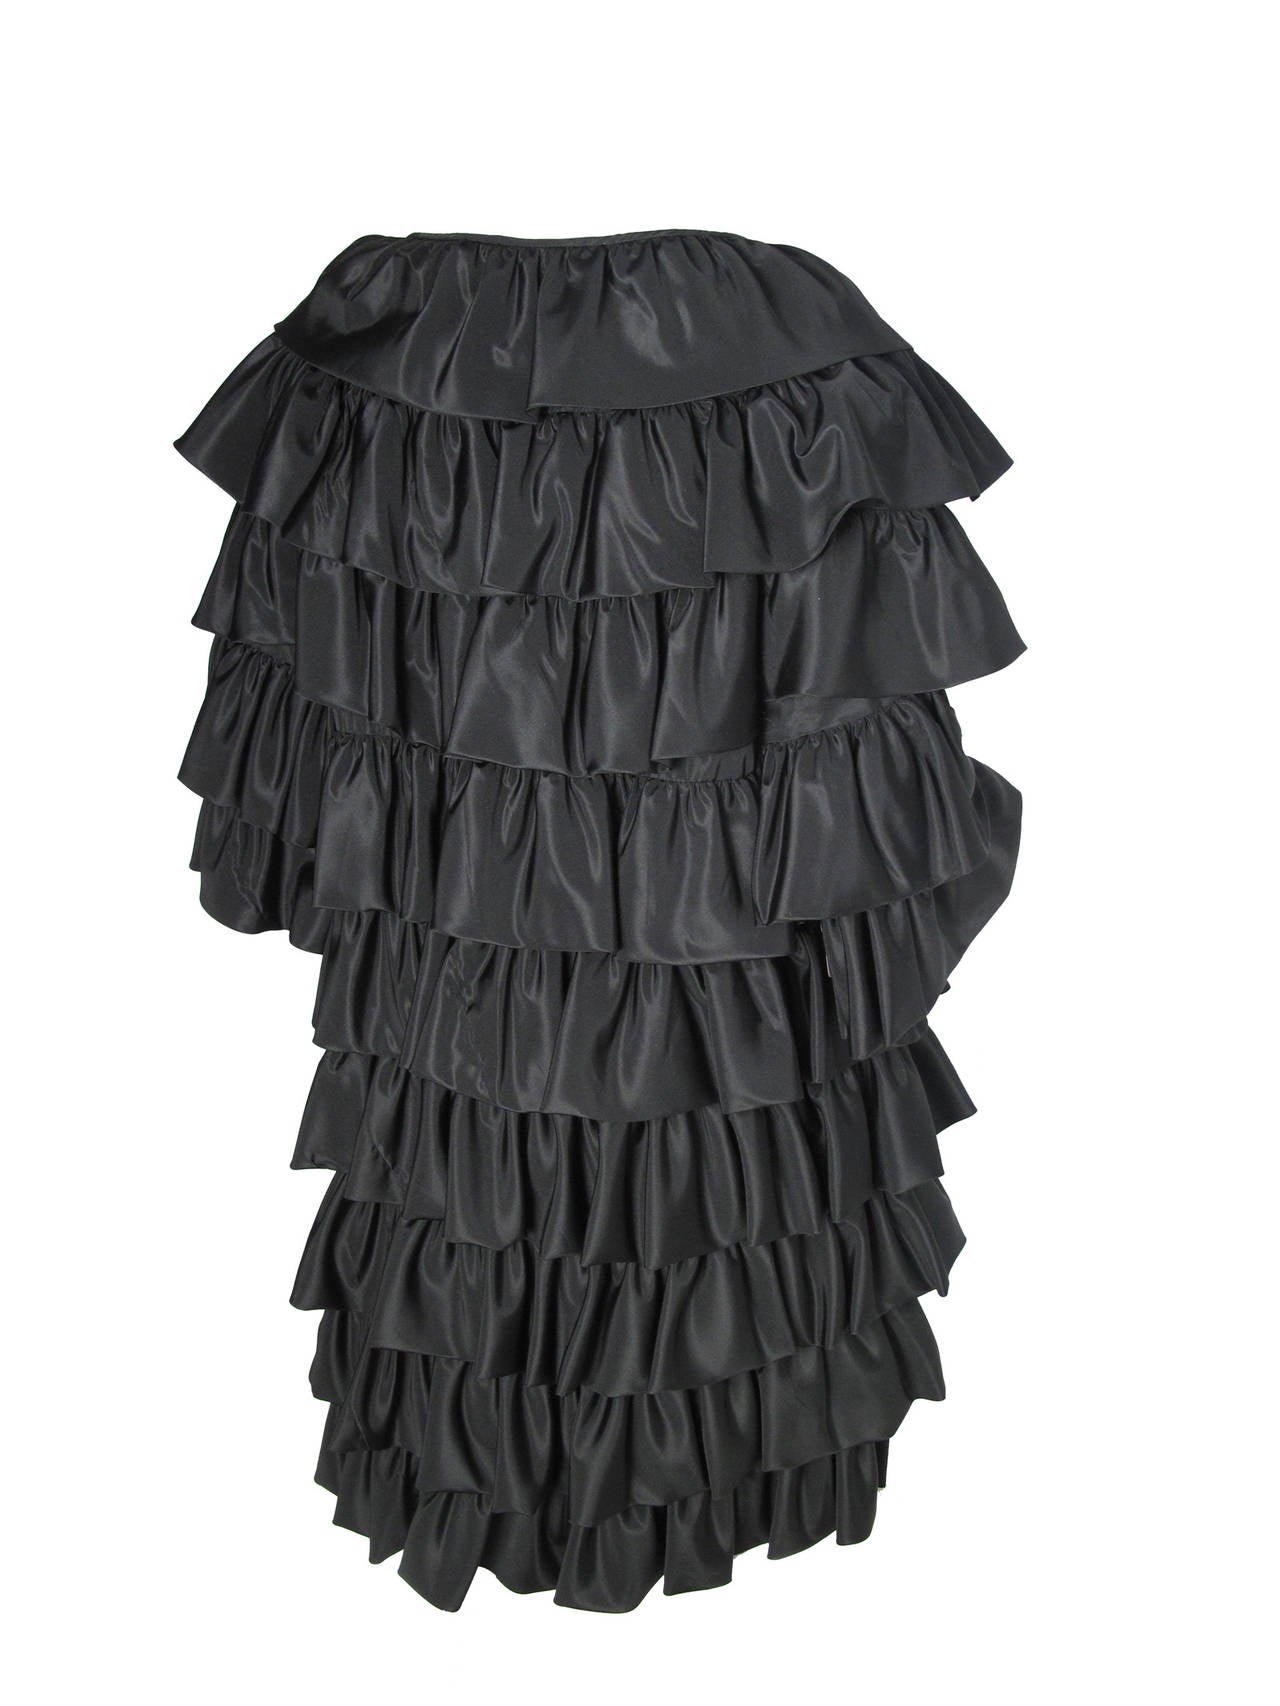 Victor Costa Black Ruffle Coat In Excellent Condition In Austin, TX